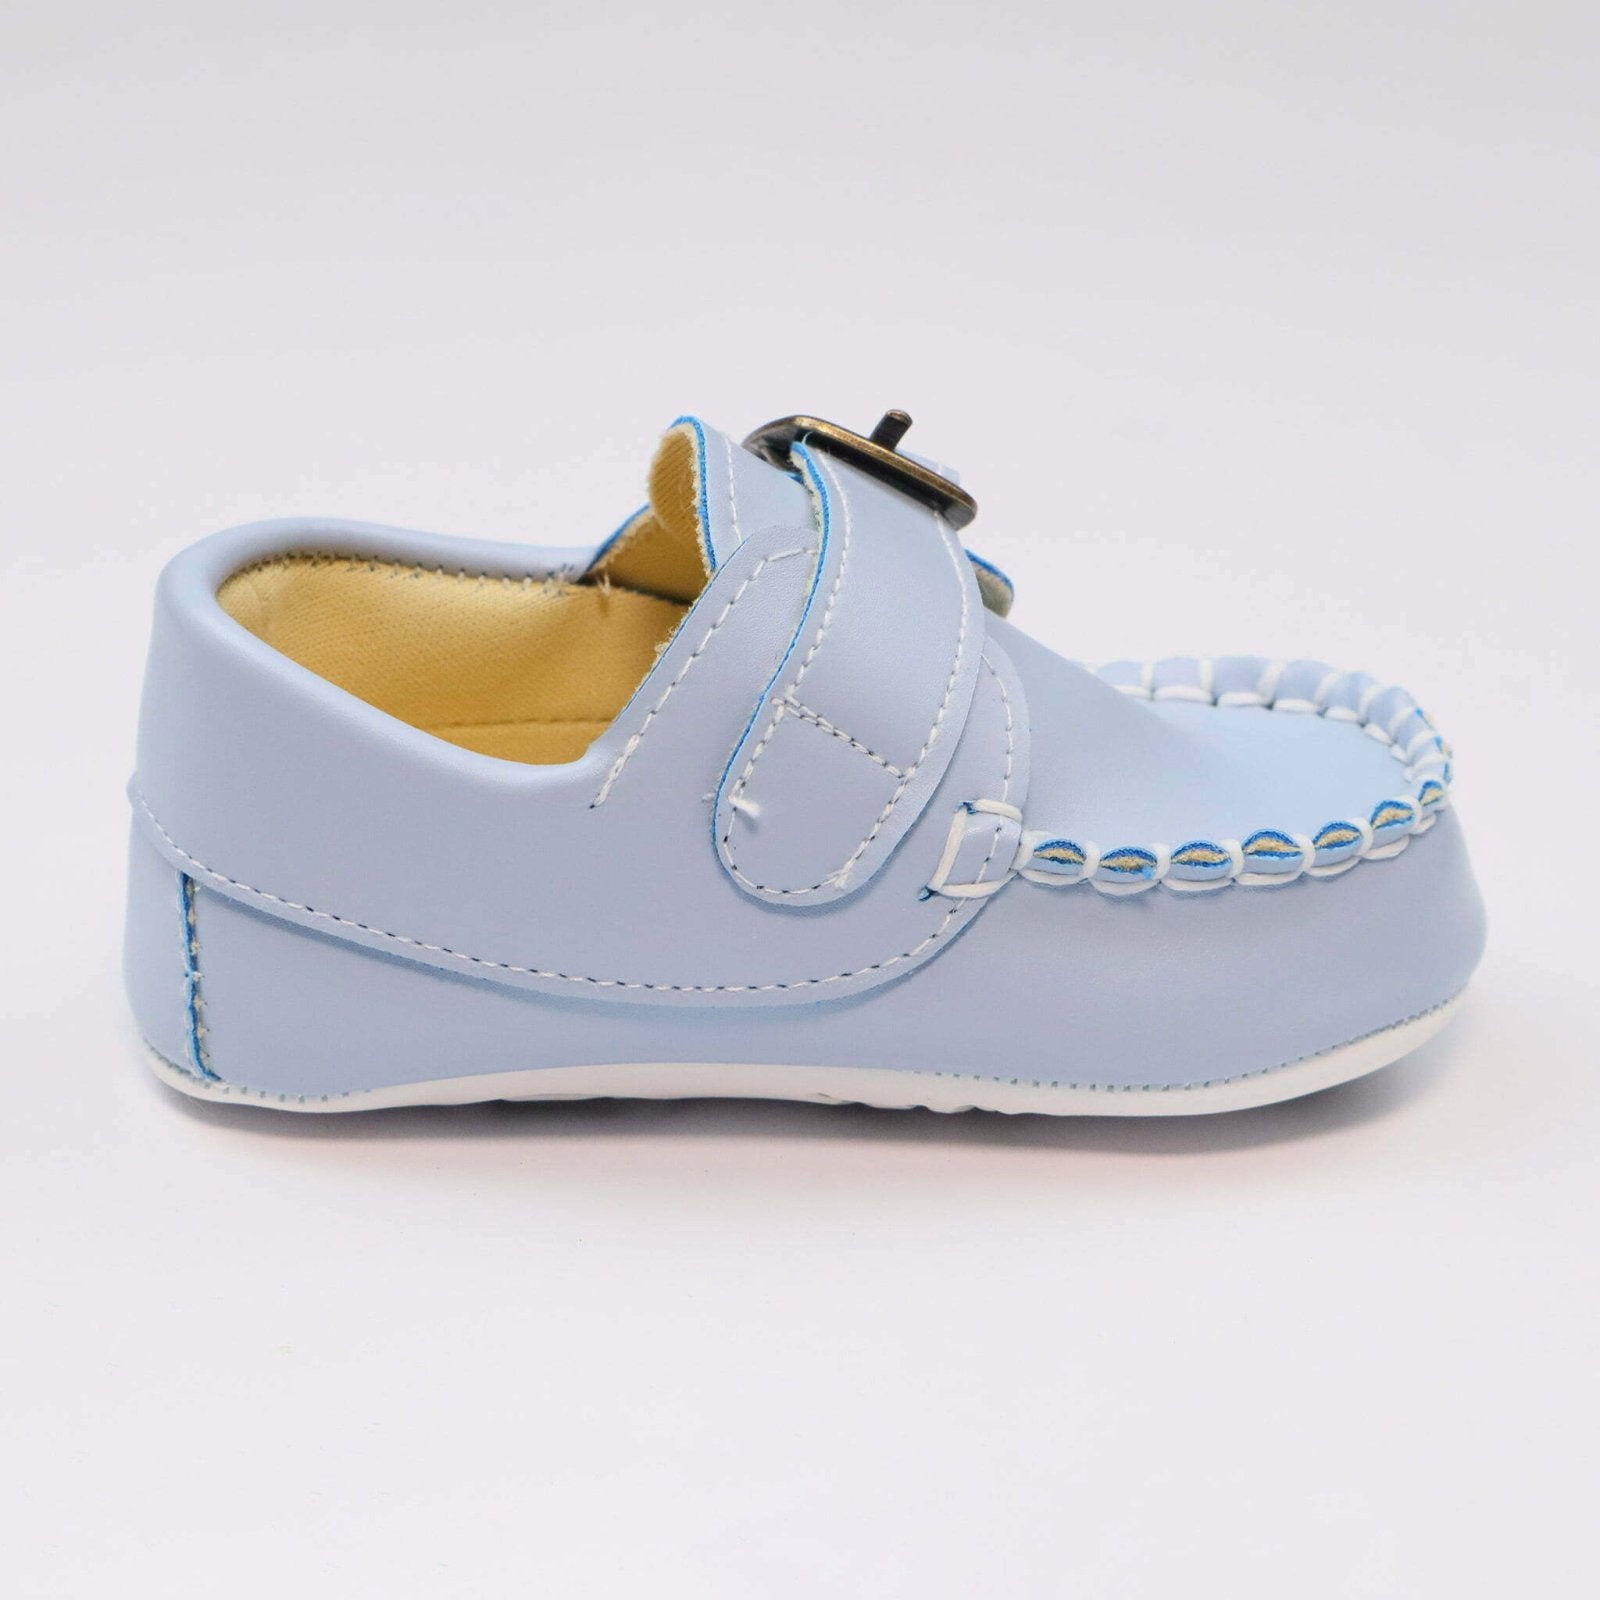 Baby Shoes Light Blue With Buckle by Baby Pattini